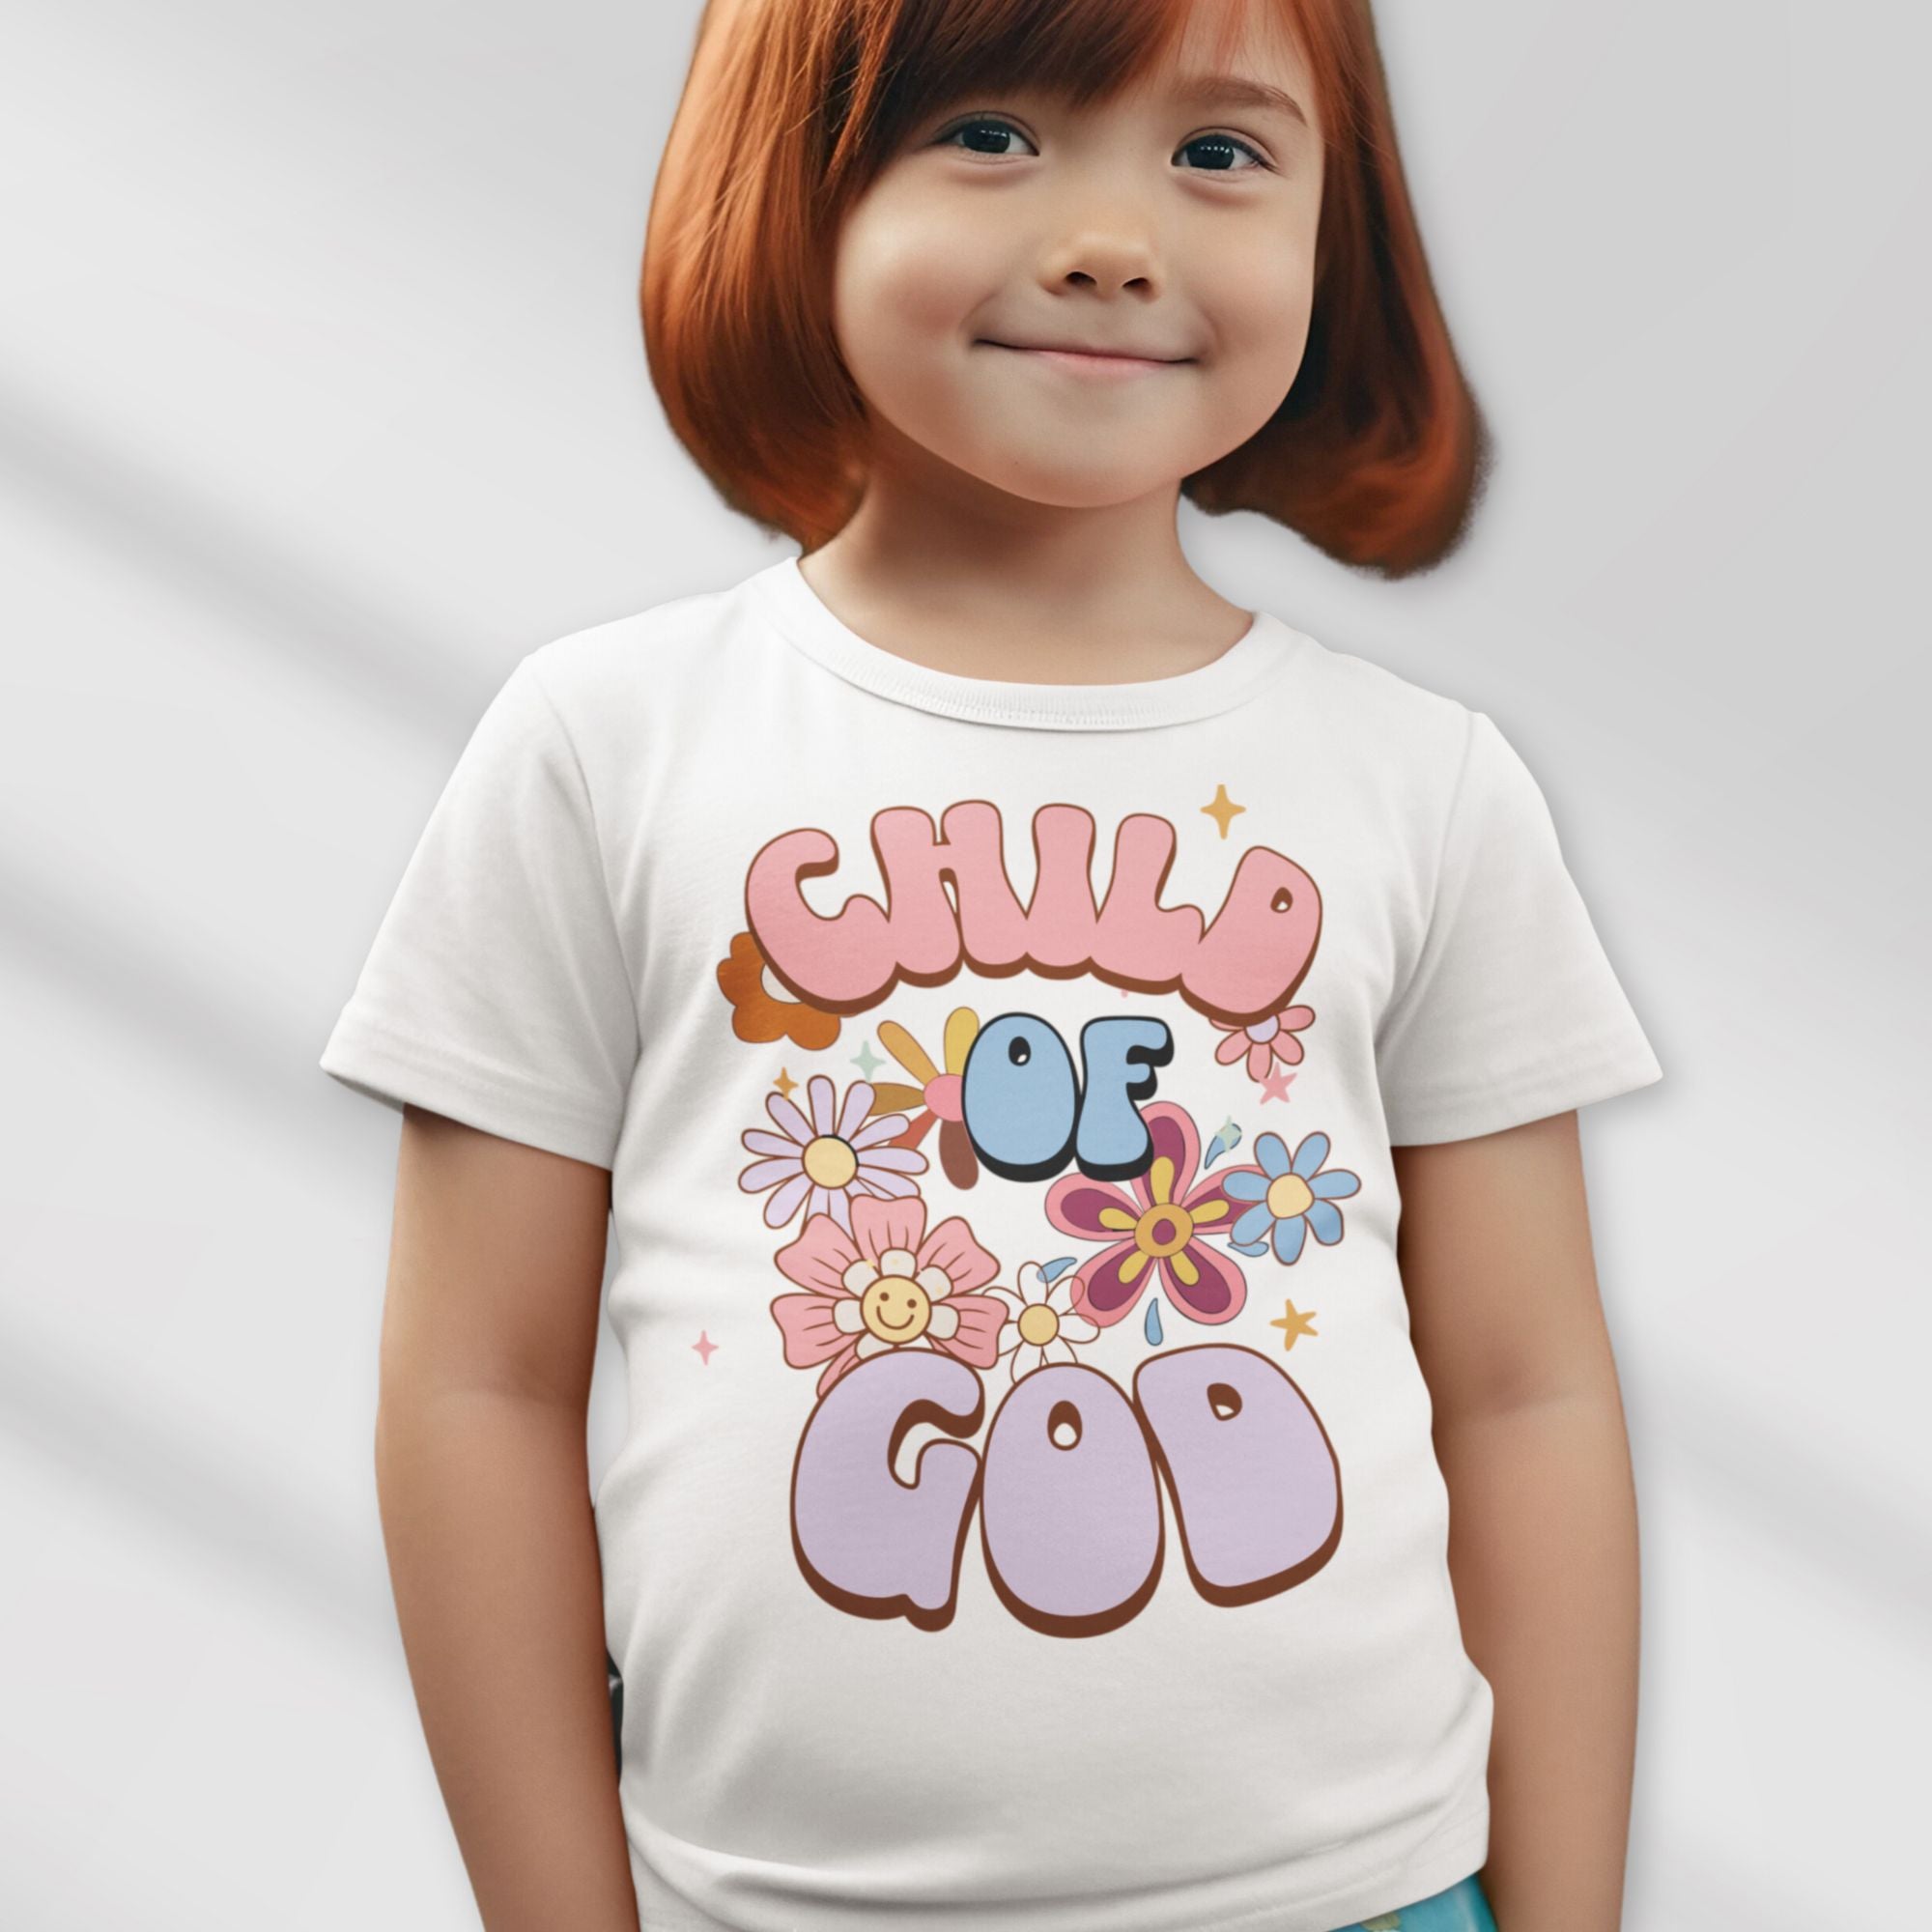 Child of God Youth Short Sleeve Tee Color: White Size: S Jesus Passion Apparel